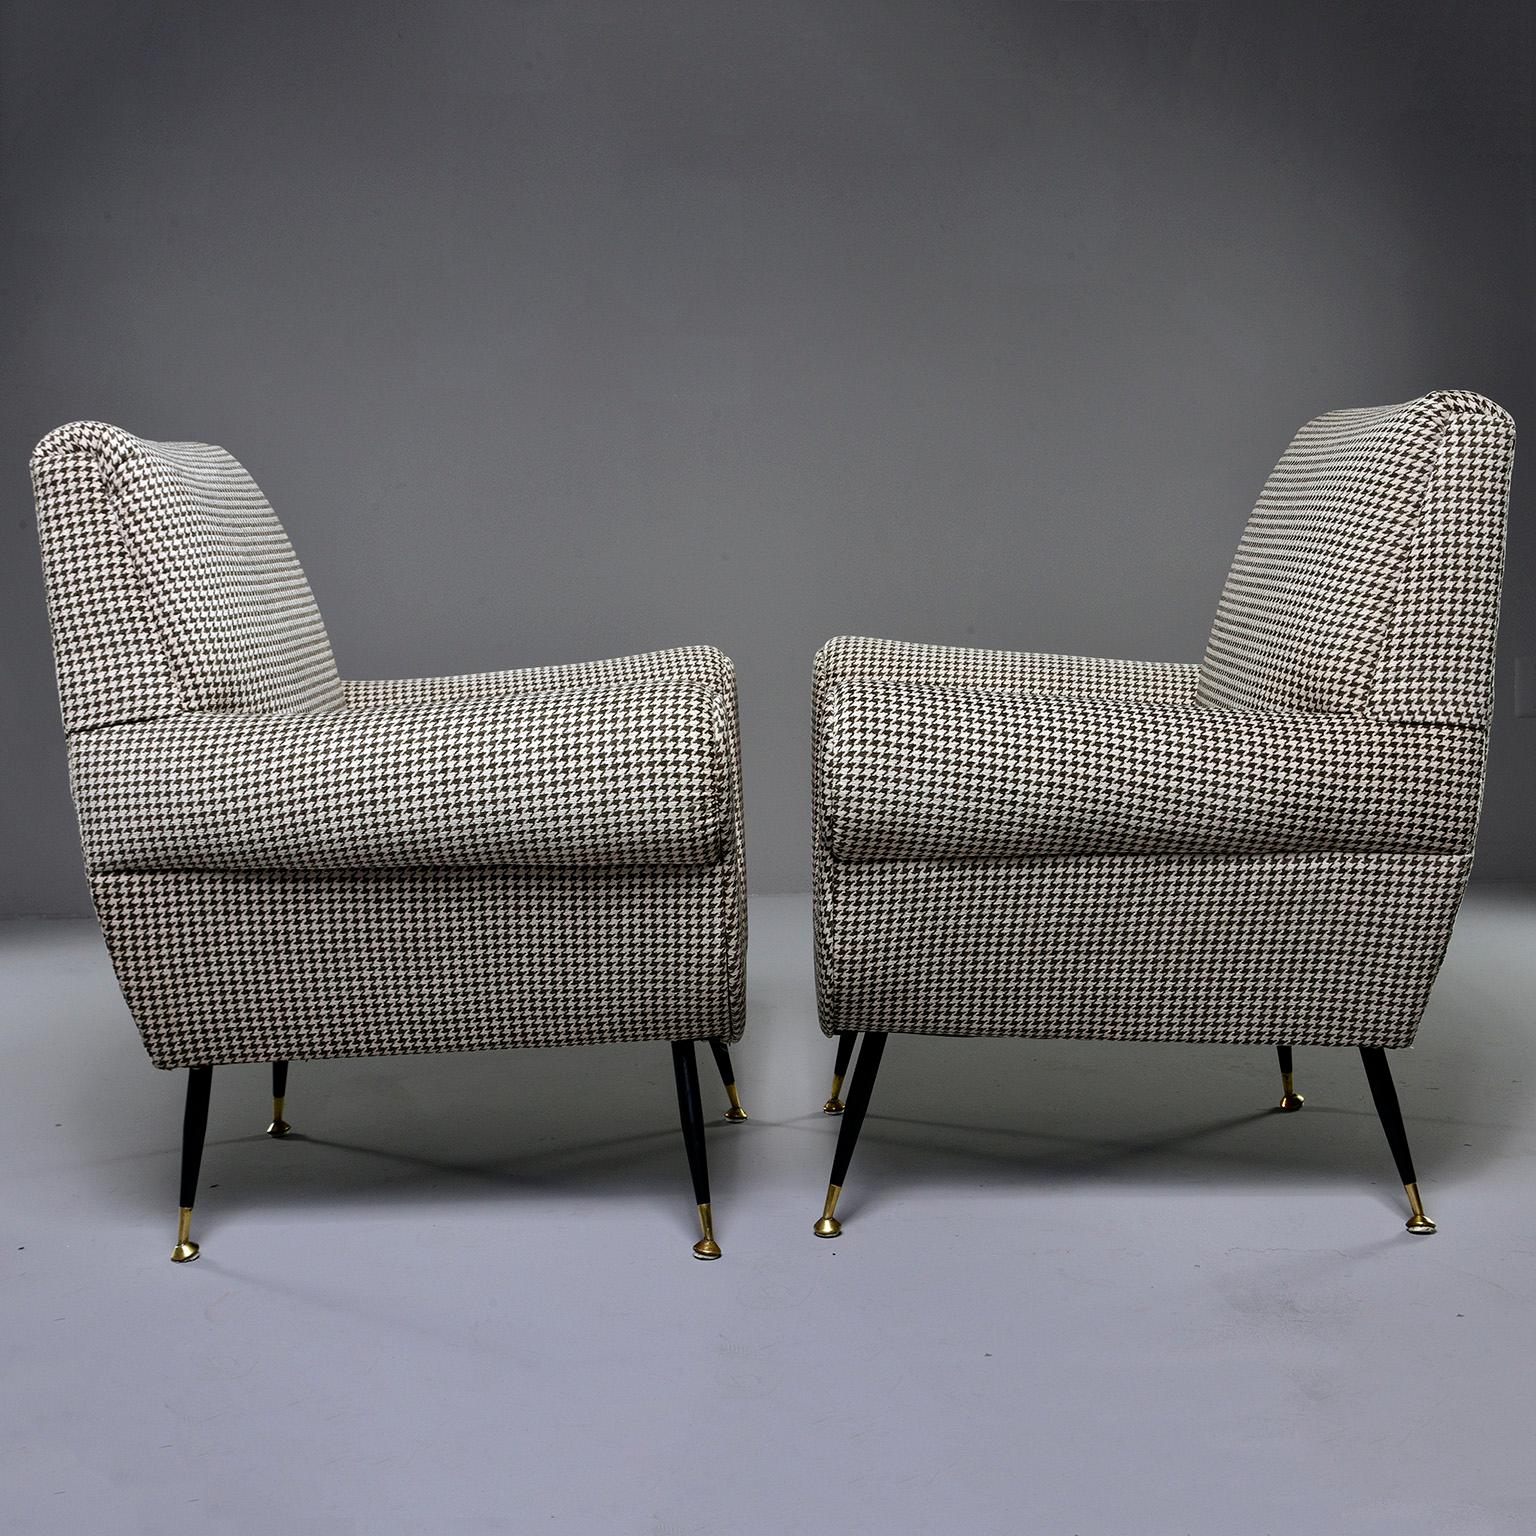 Mid-Century Modern Pair of Newly Upholstered Chairs by Gigi Radice for Minotti